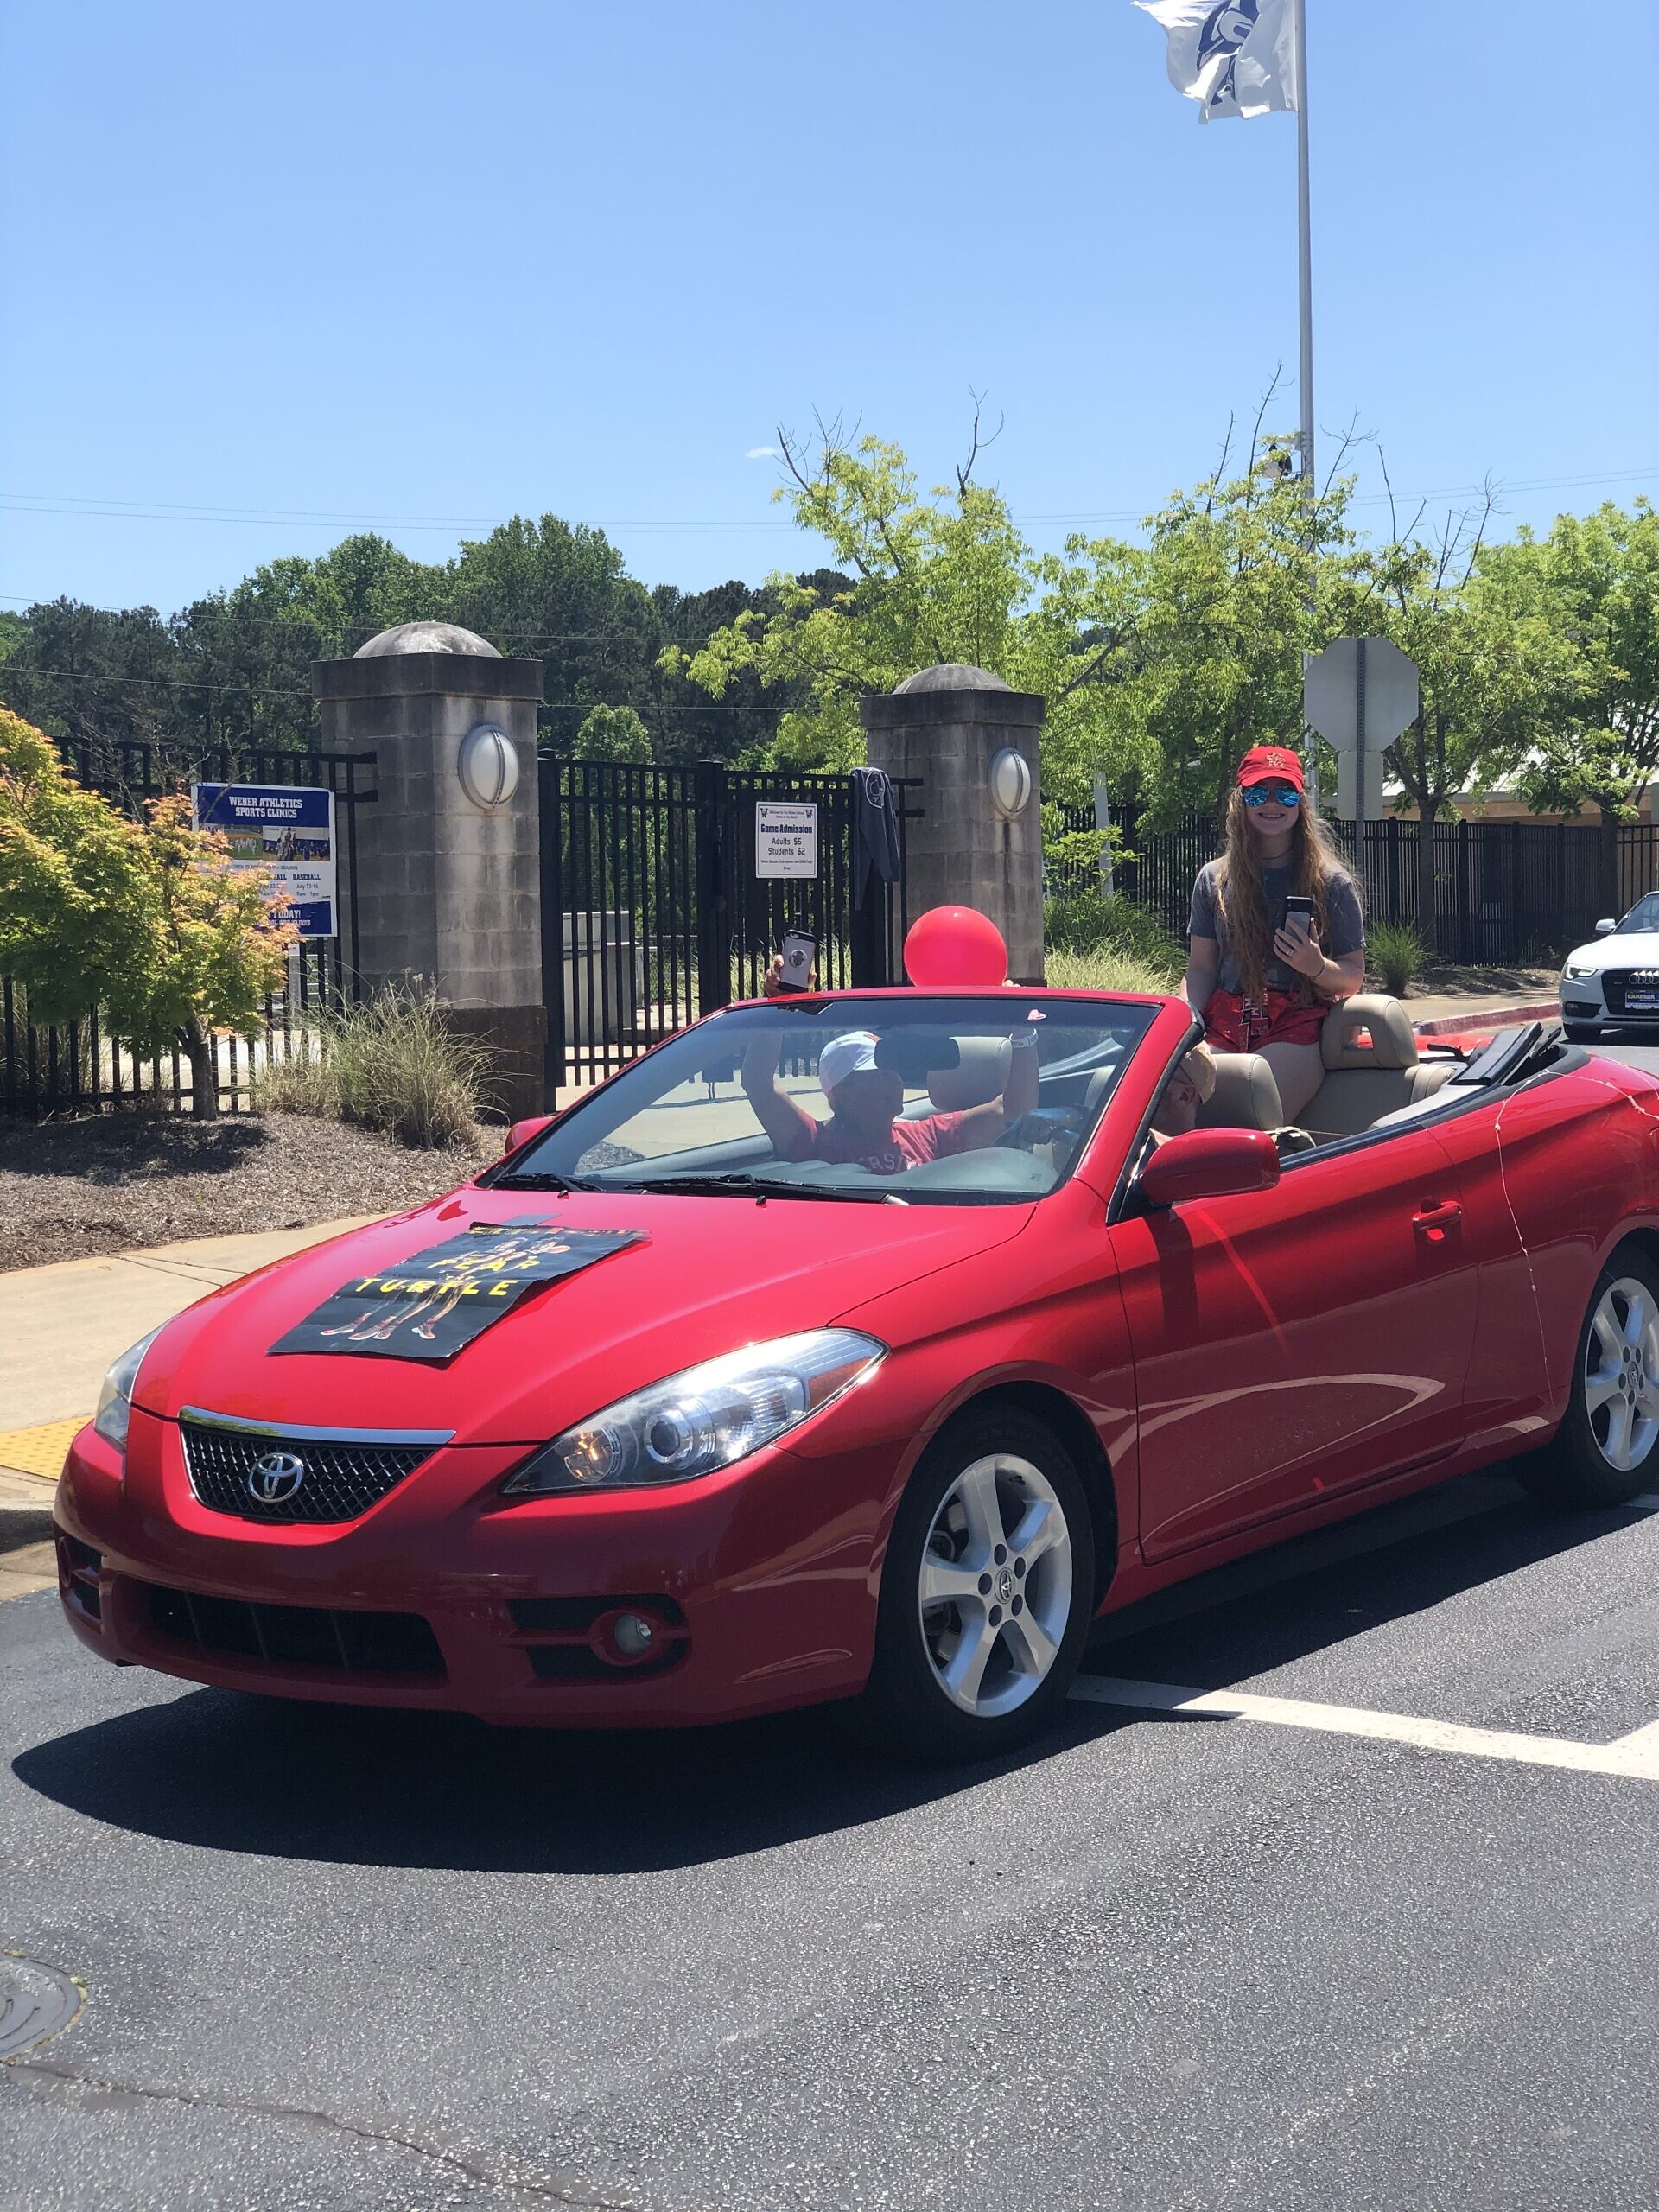 Brooke Orenstein pops out of her red convertible as part of the Weber senior commitment day parade.